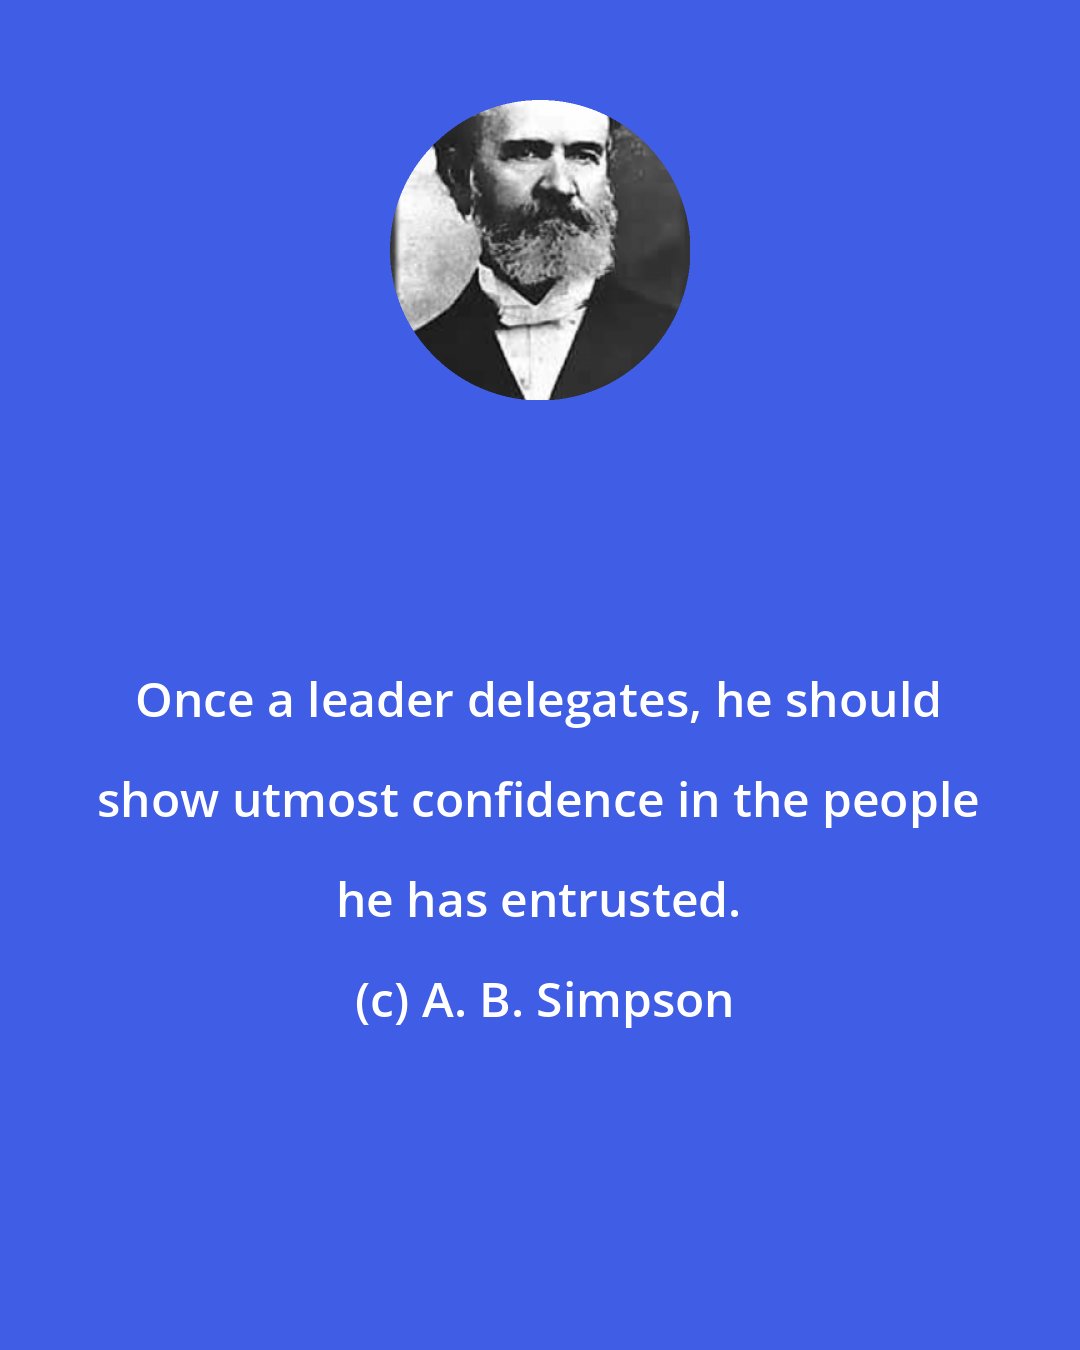 A. B. Simpson: Once a leader delegates, he should show utmost confidence in the people he has entrusted.